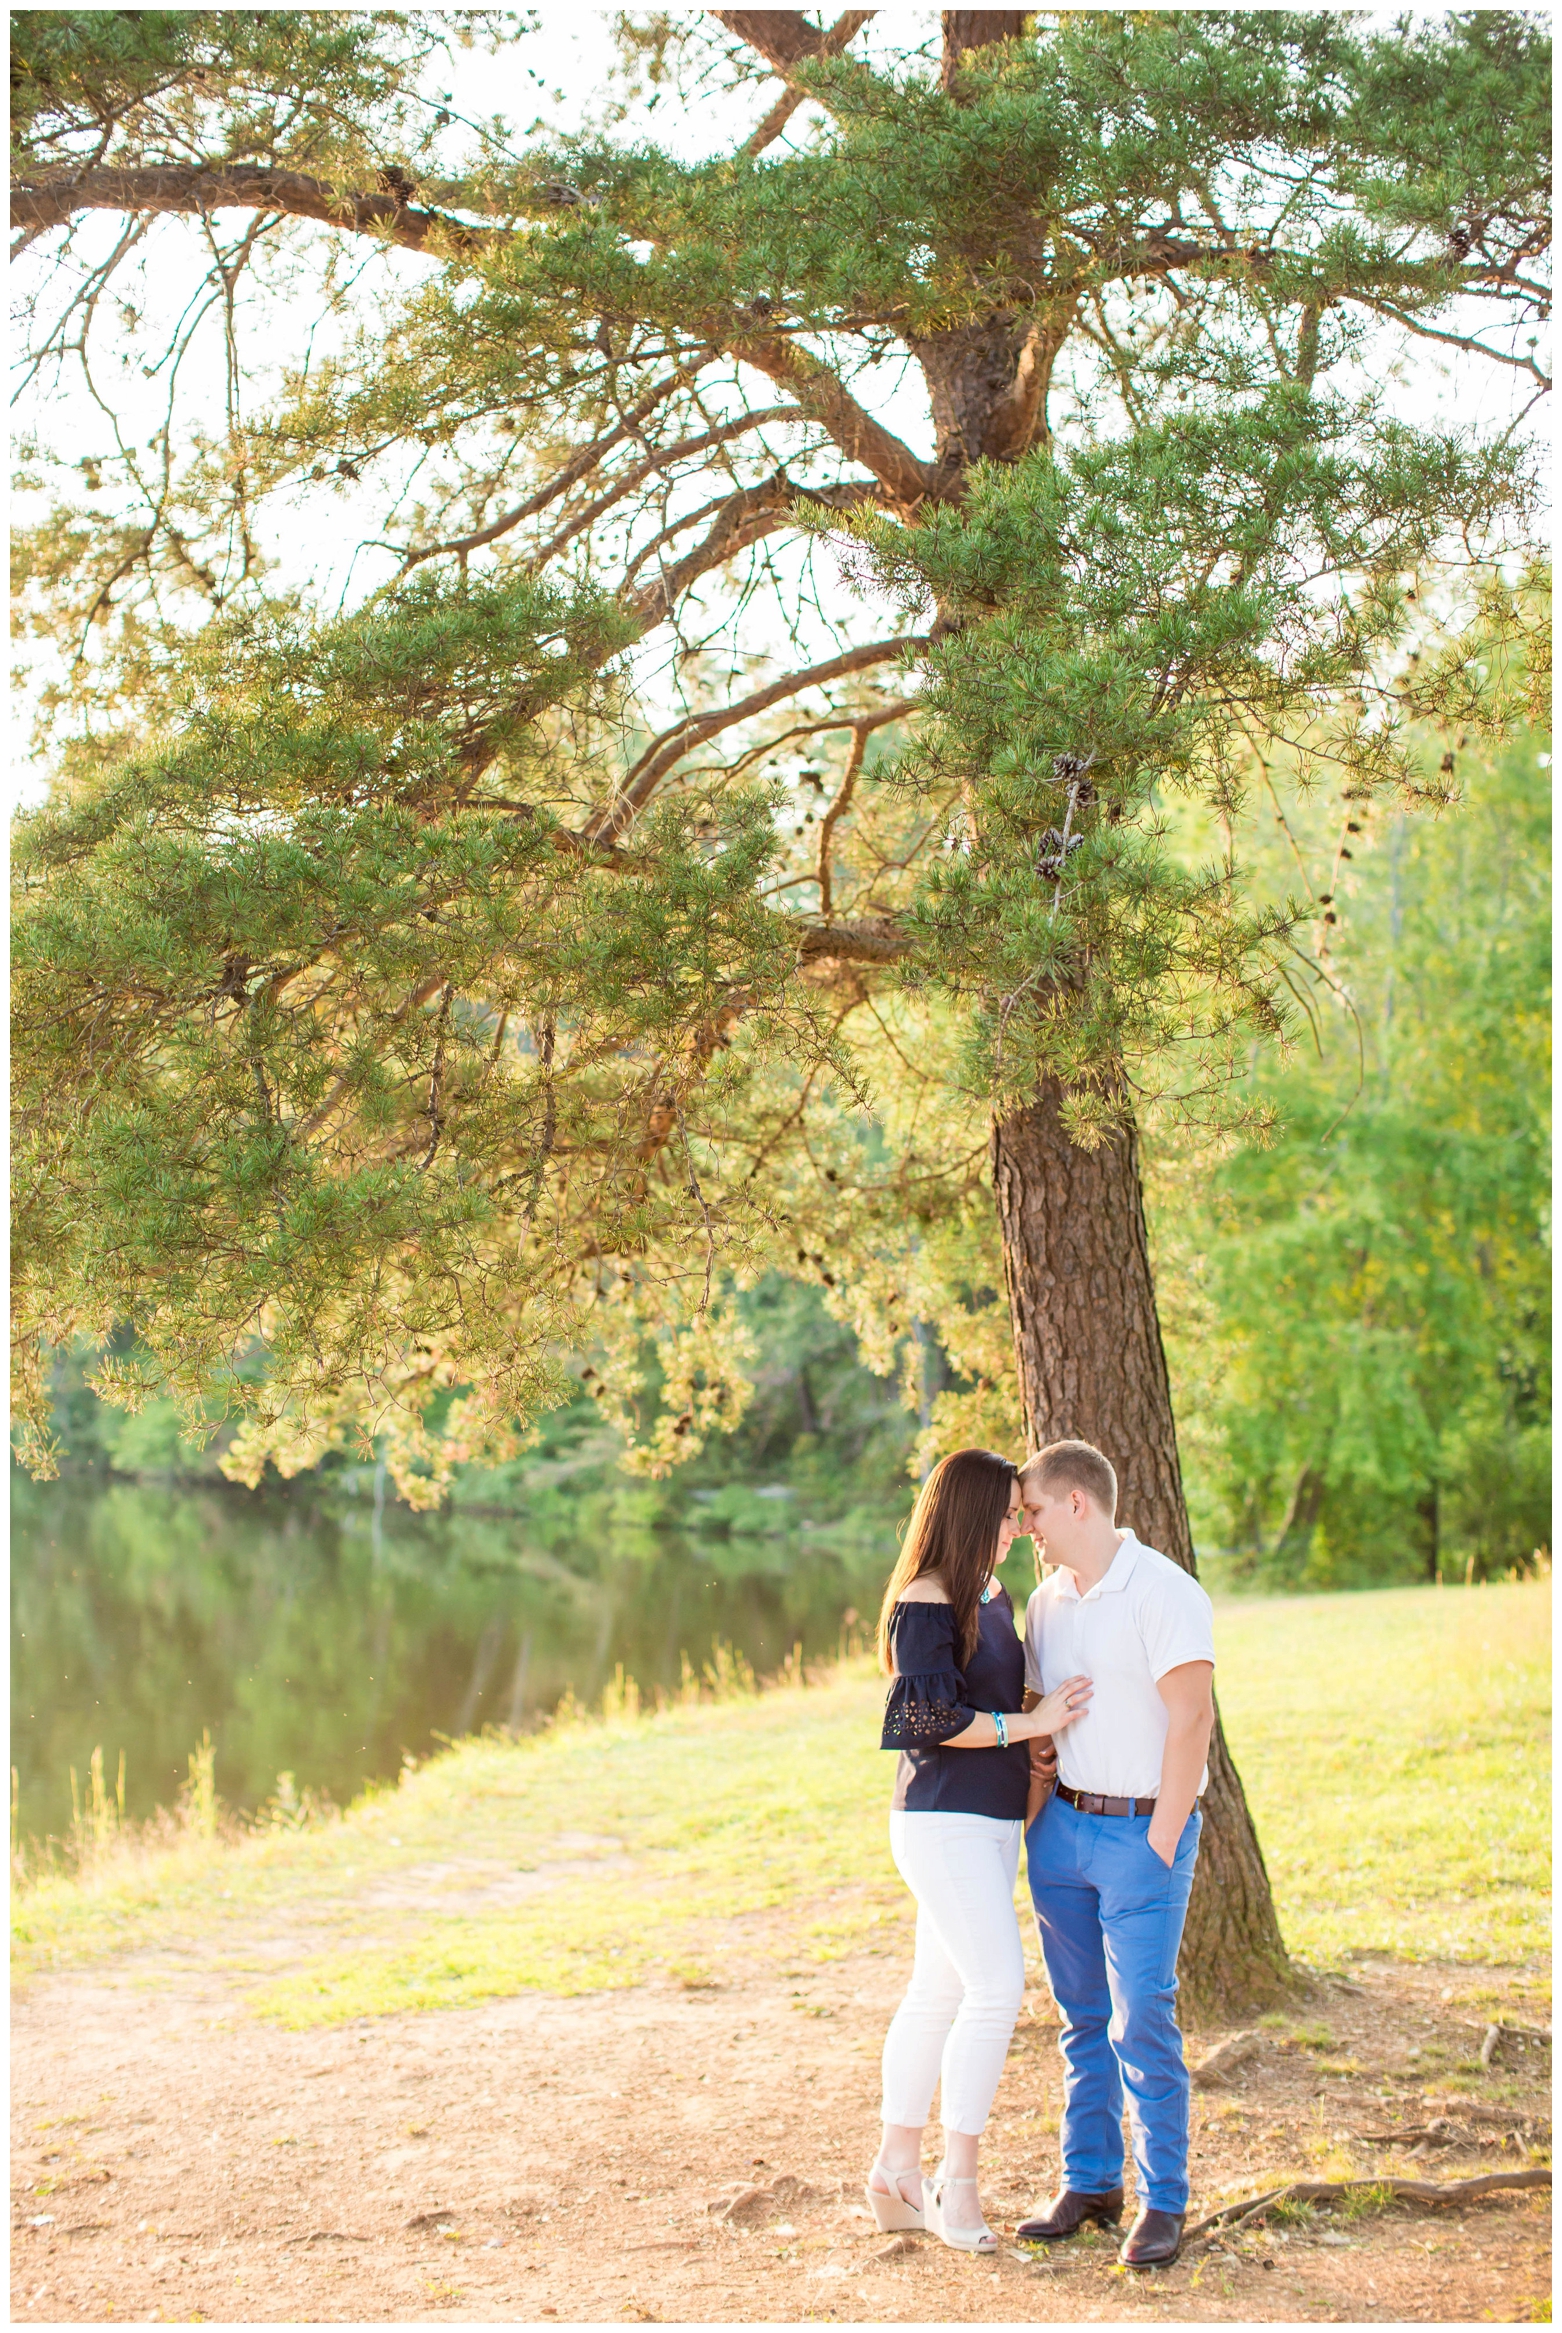 View More: http://hopetaylorphotographyphotos.pass.us/hunter-and-andy-engagement